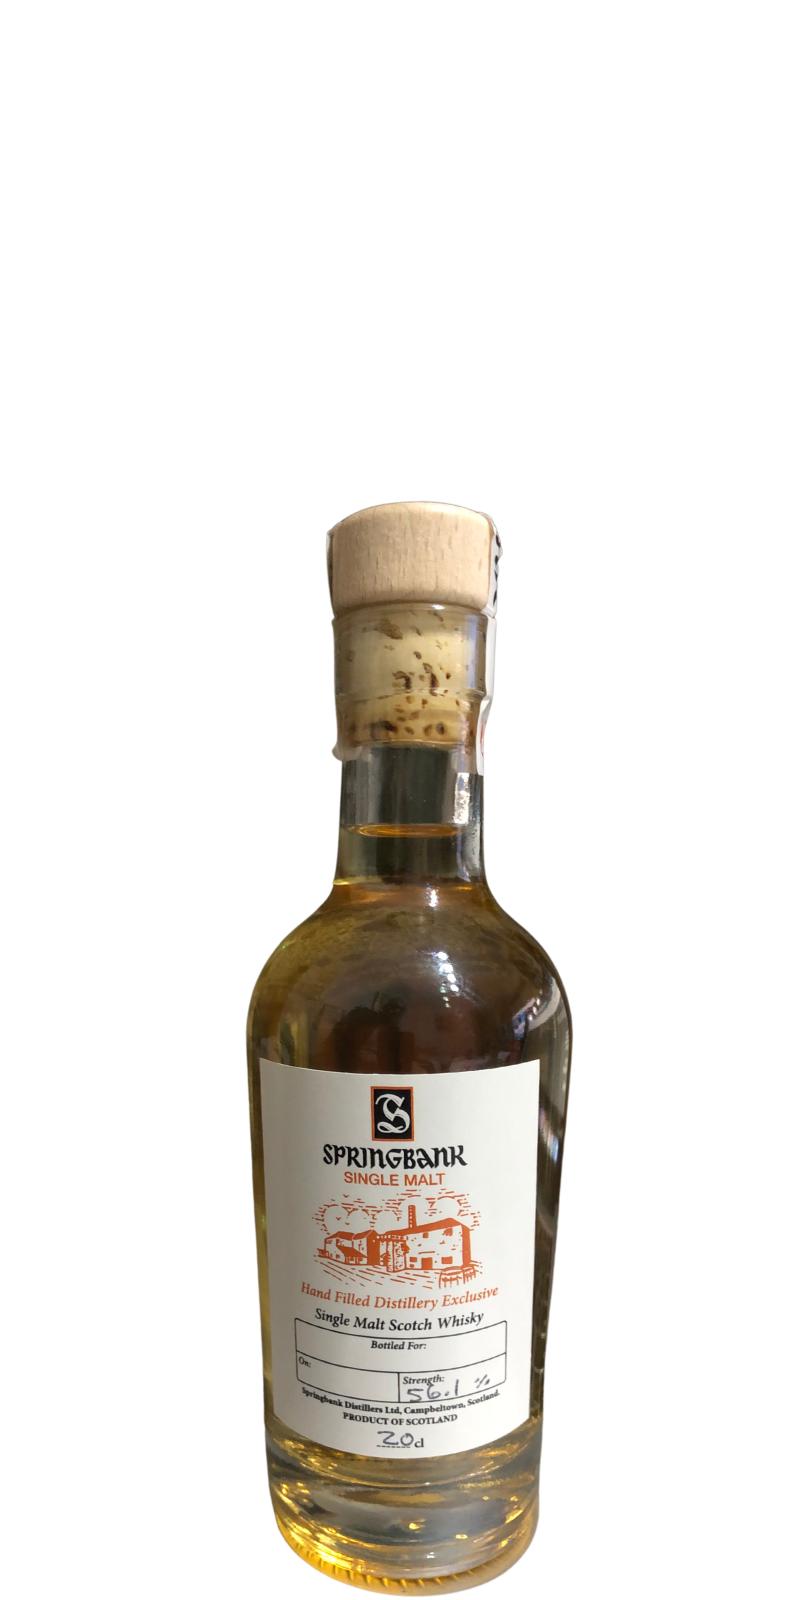 Springbank Hand Filled Distillery Exclusive 56.1% 200ml